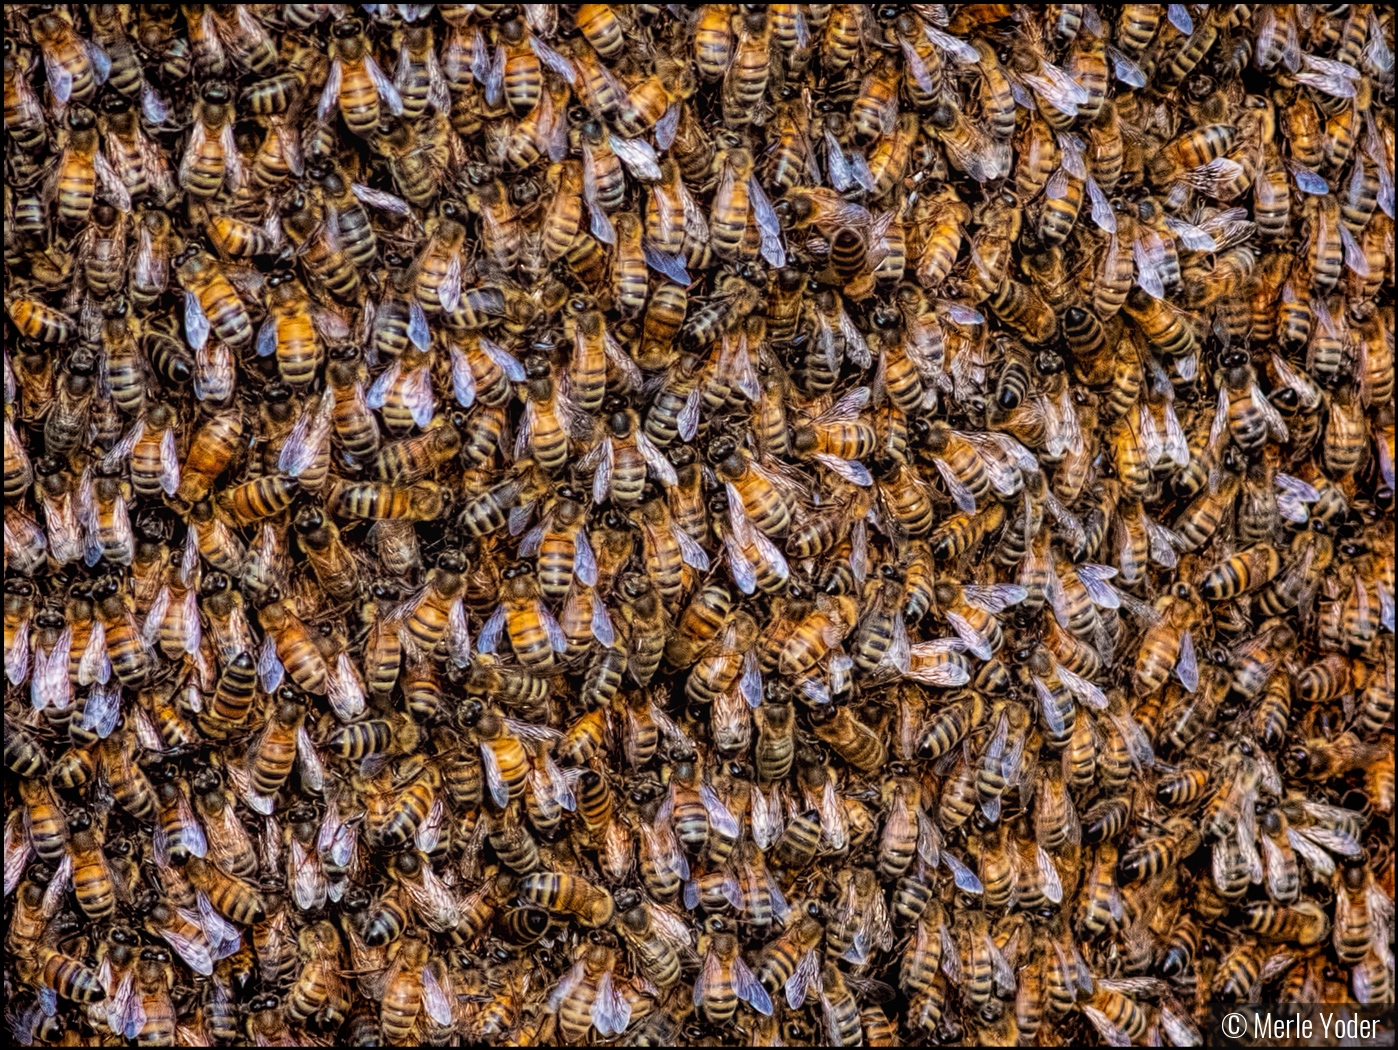 Busy as a Bee by Merle Yoder